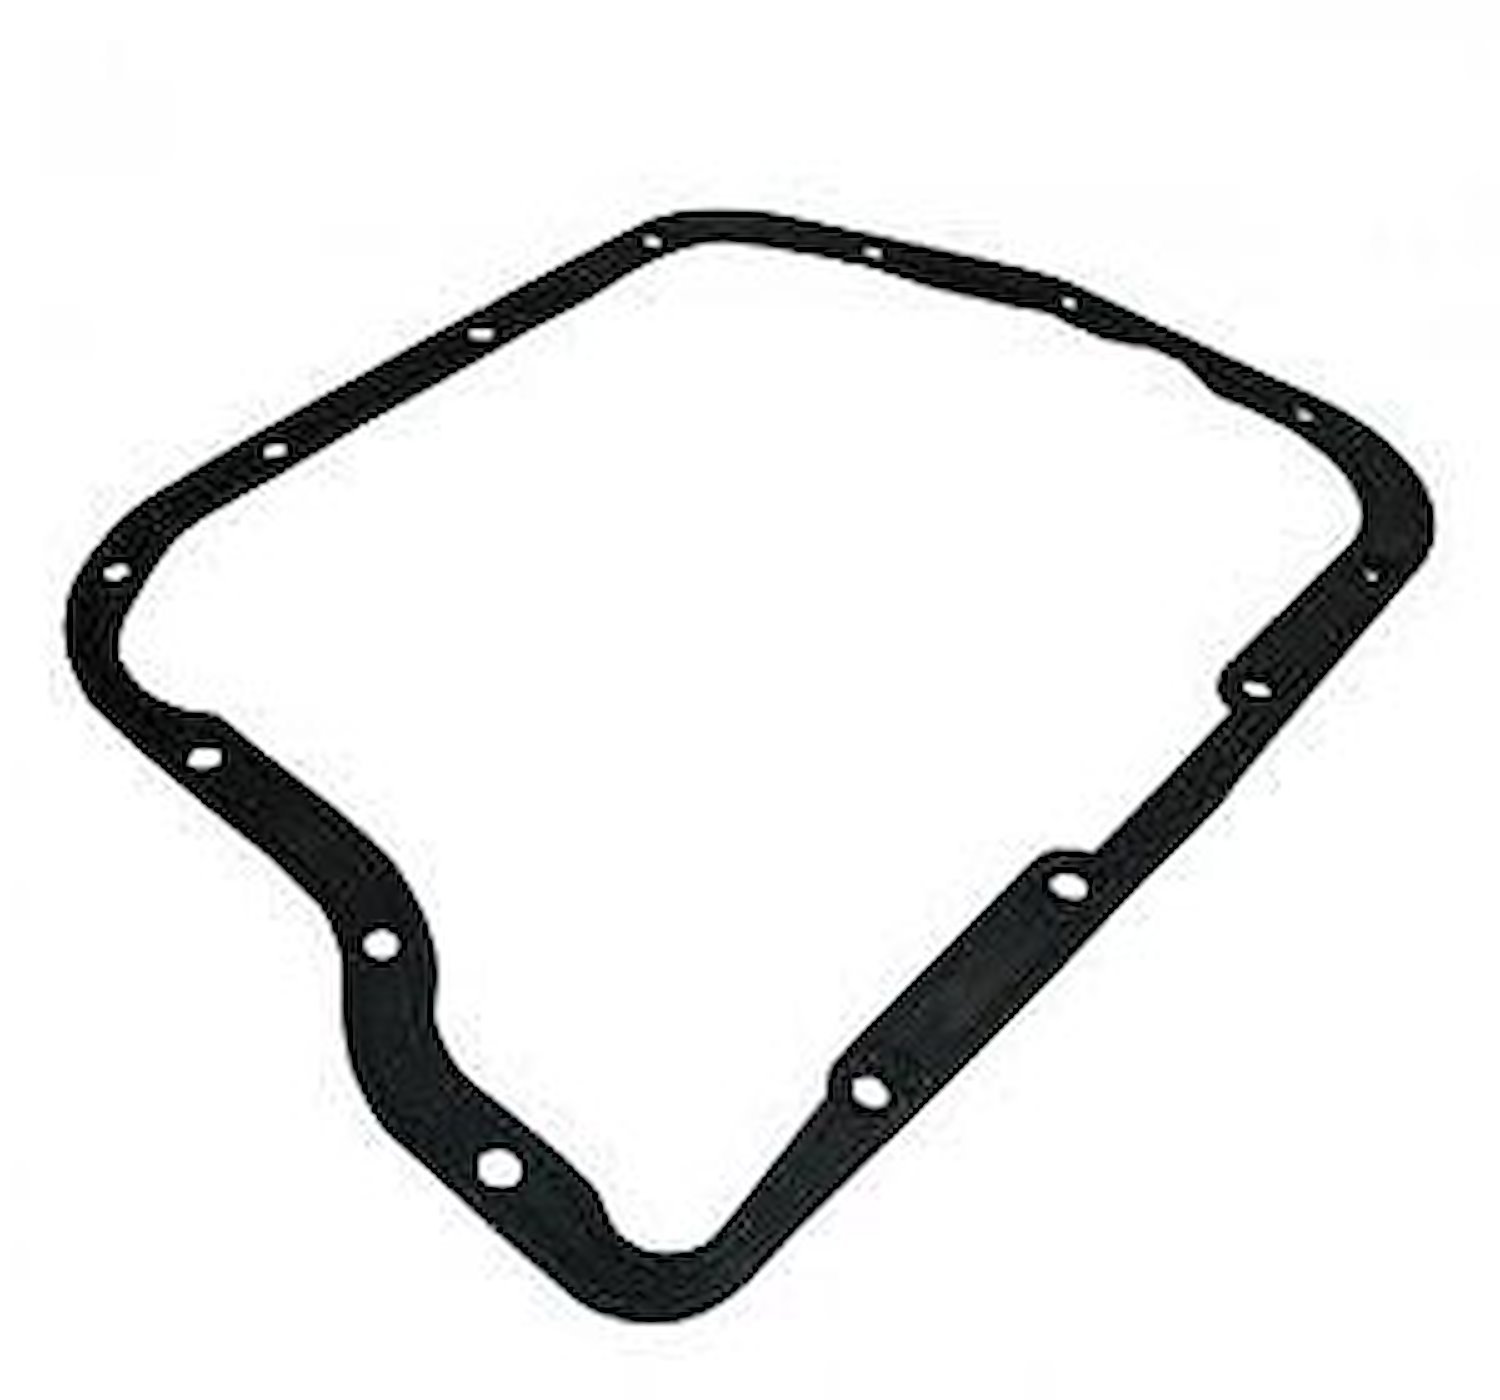 A-727/A-518/46RE Oil Pan Gasket Molded Rubber - Re-Usable